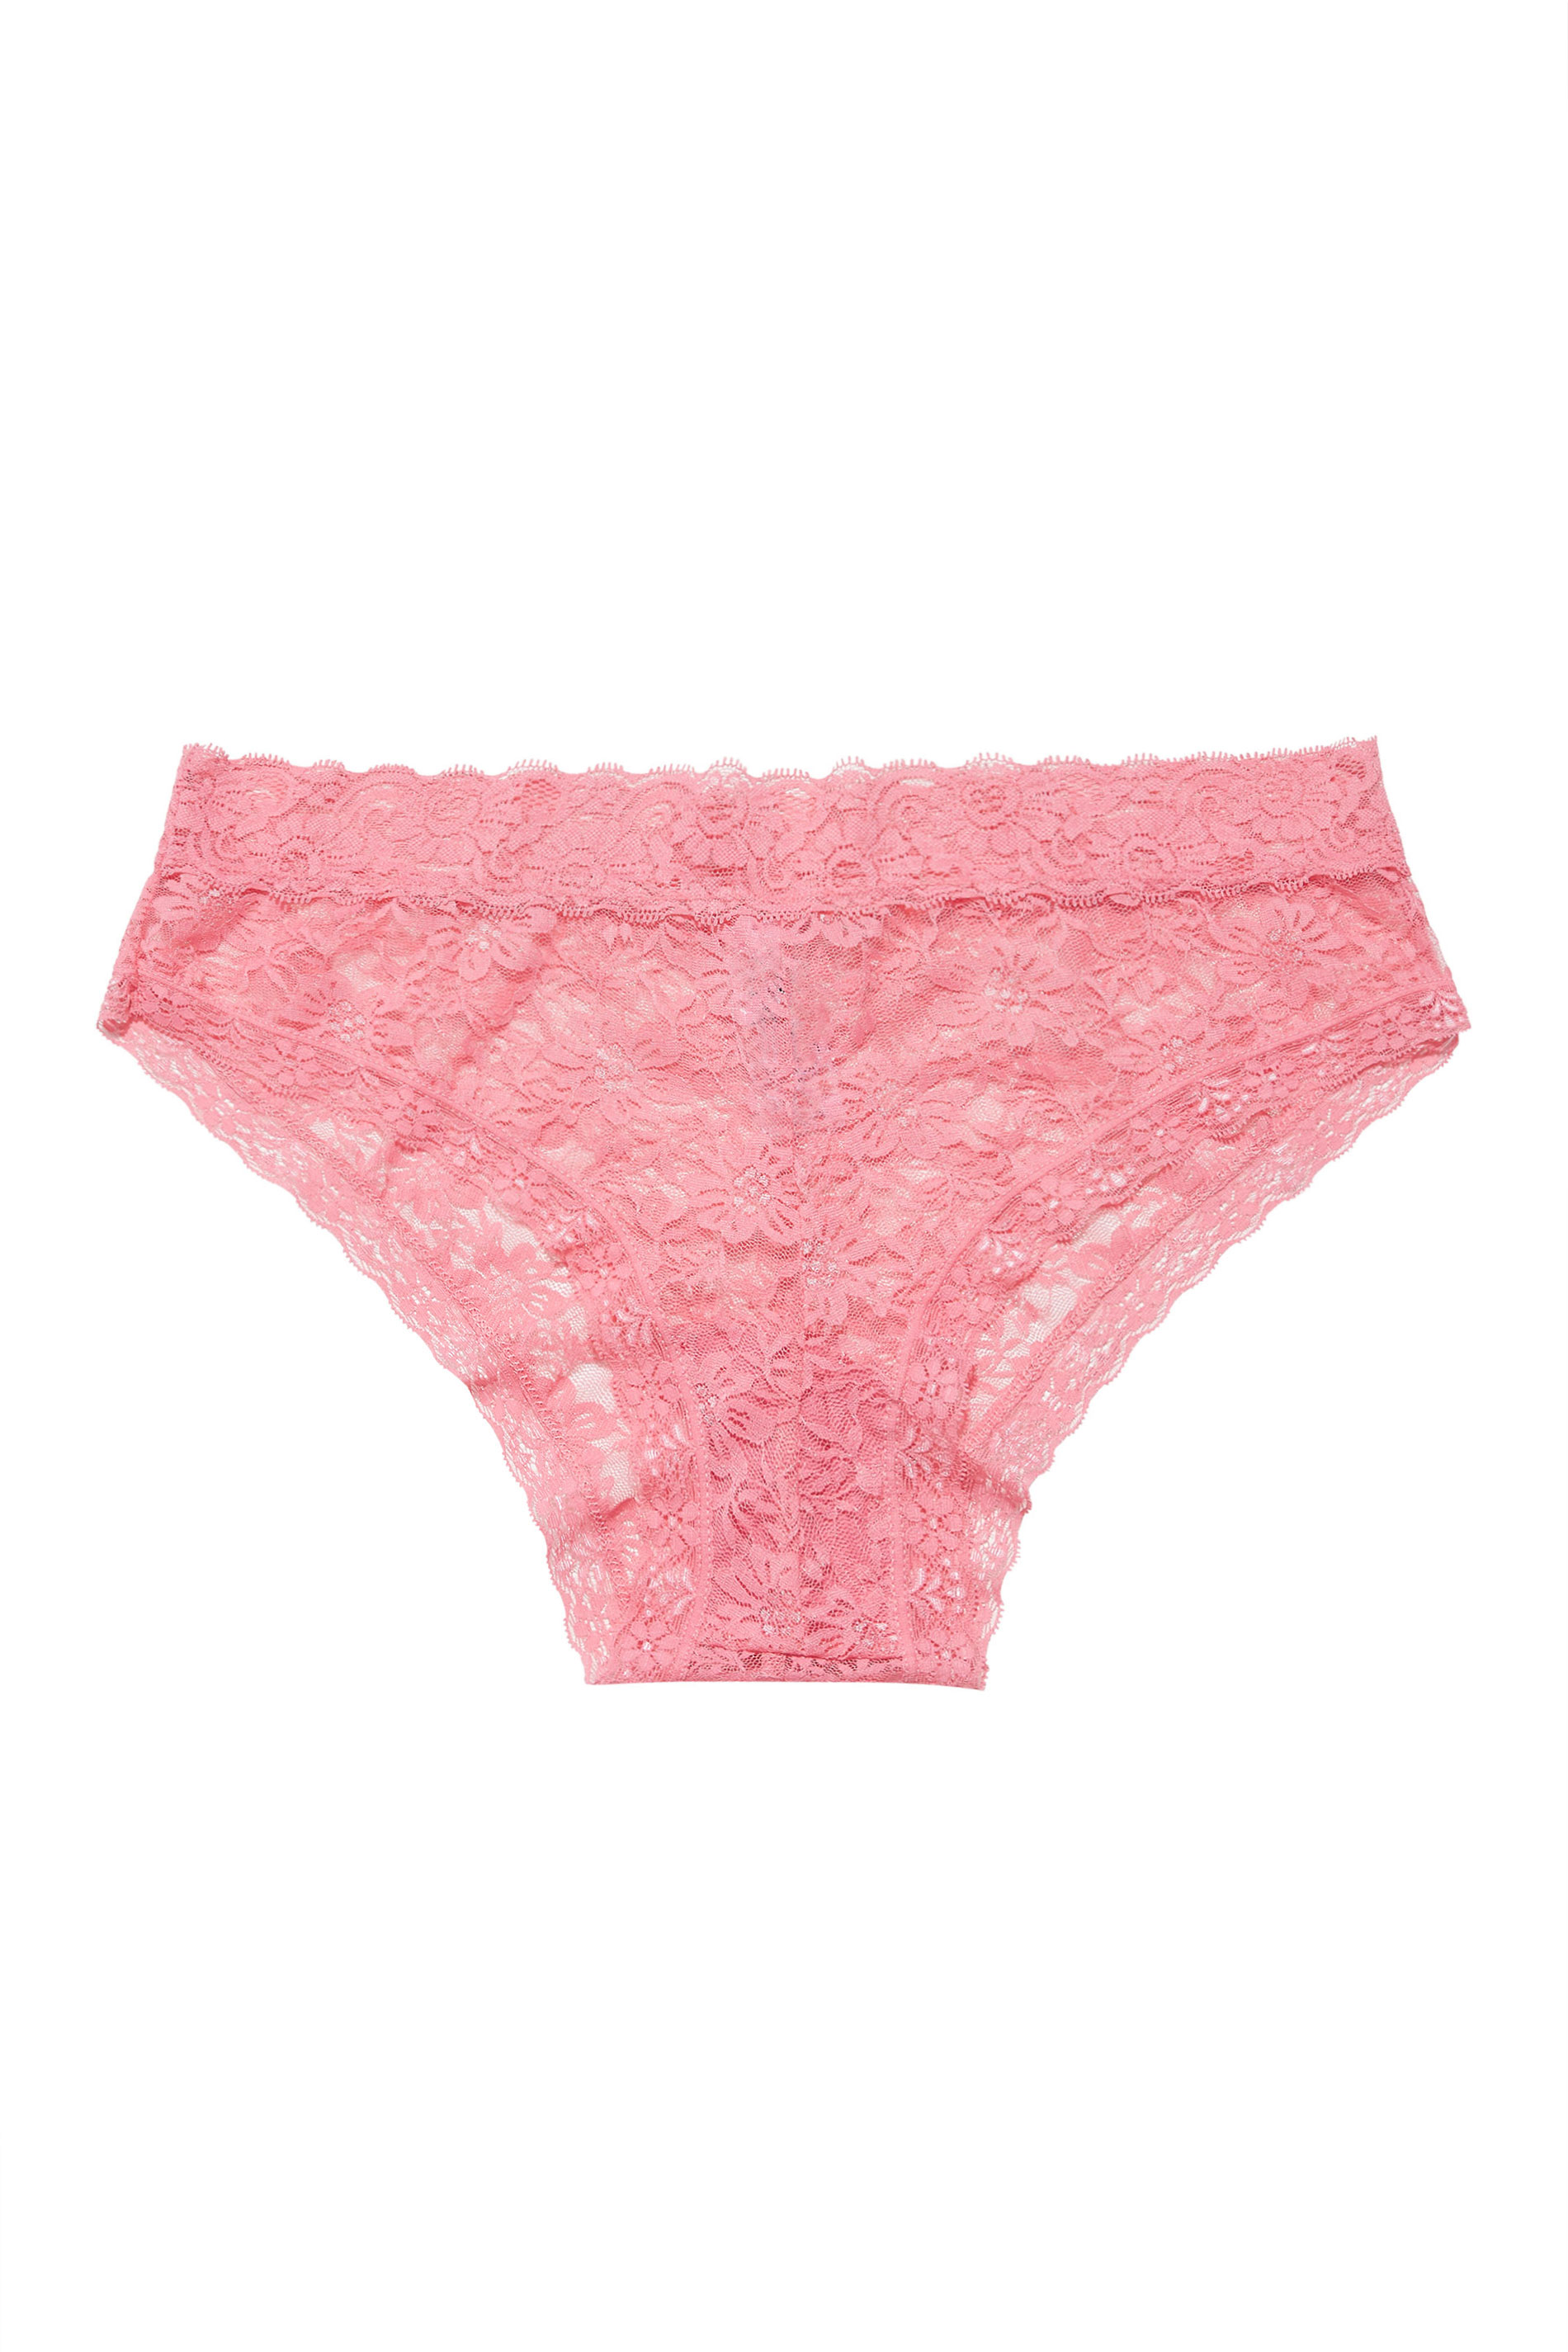 3 PACK Black & Pink Lace Low Rise Brazillian Knickers | Yours Clothing  3